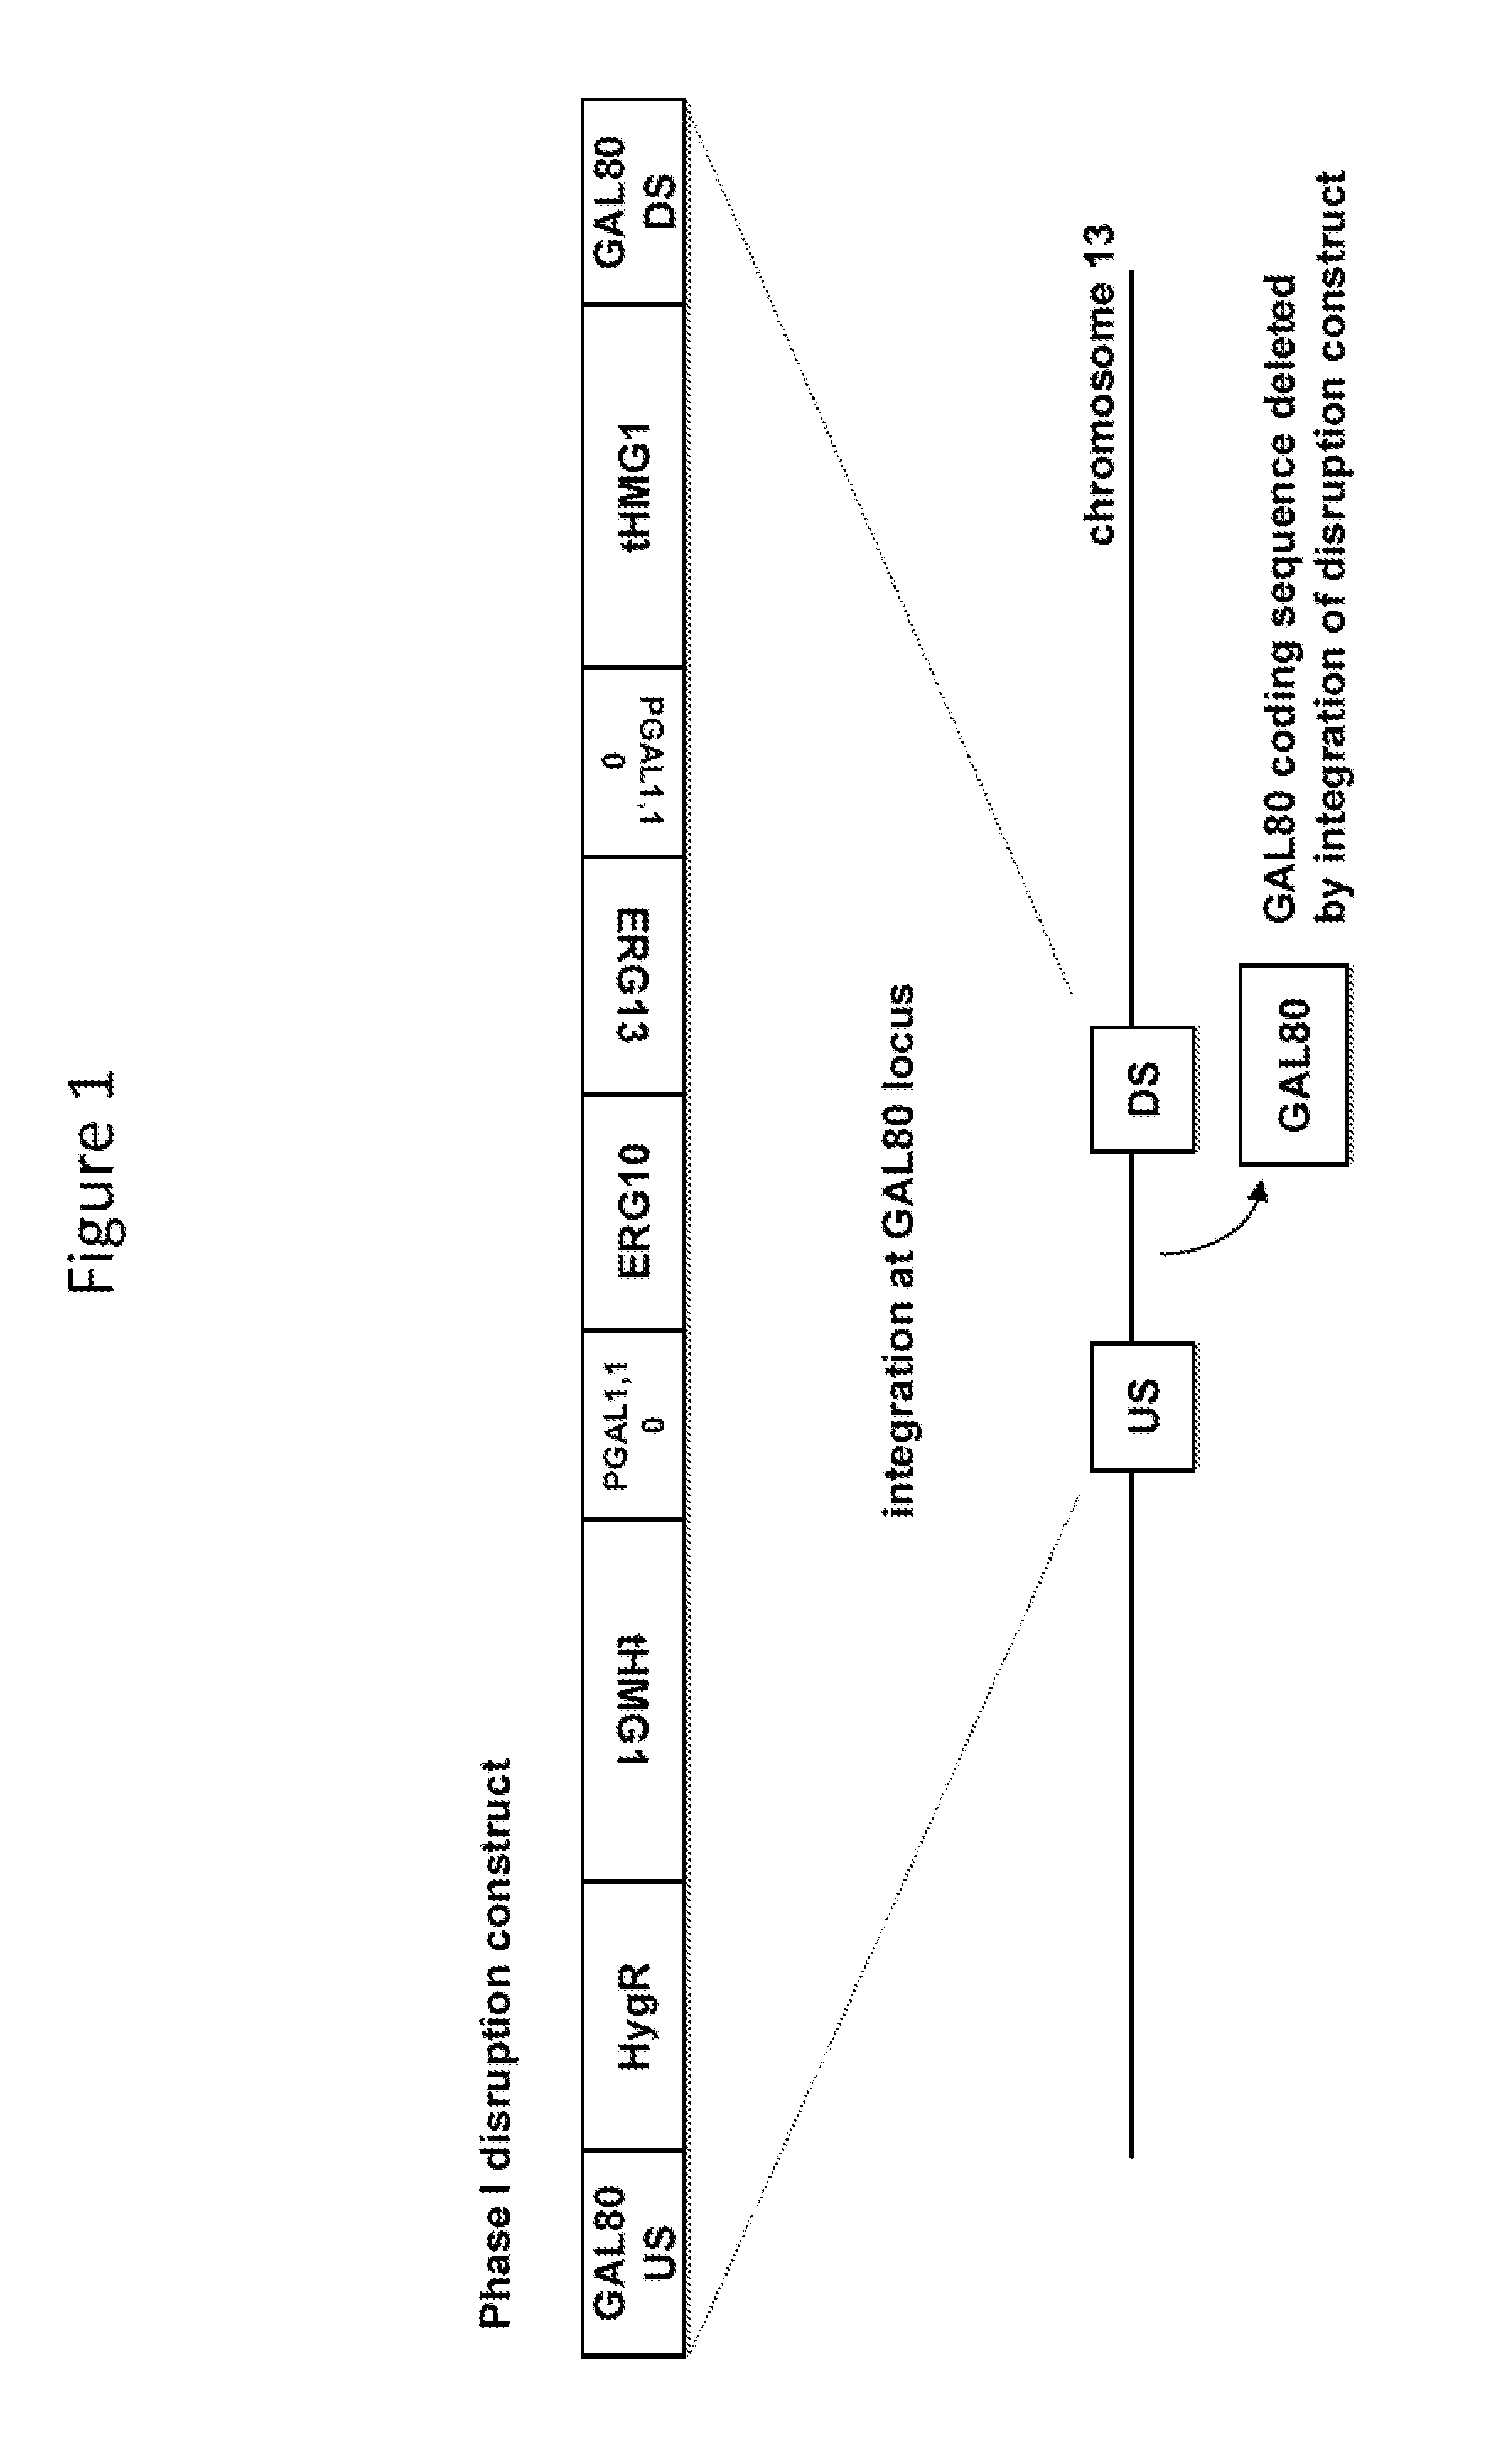 Method for generating a genetically modified microbe